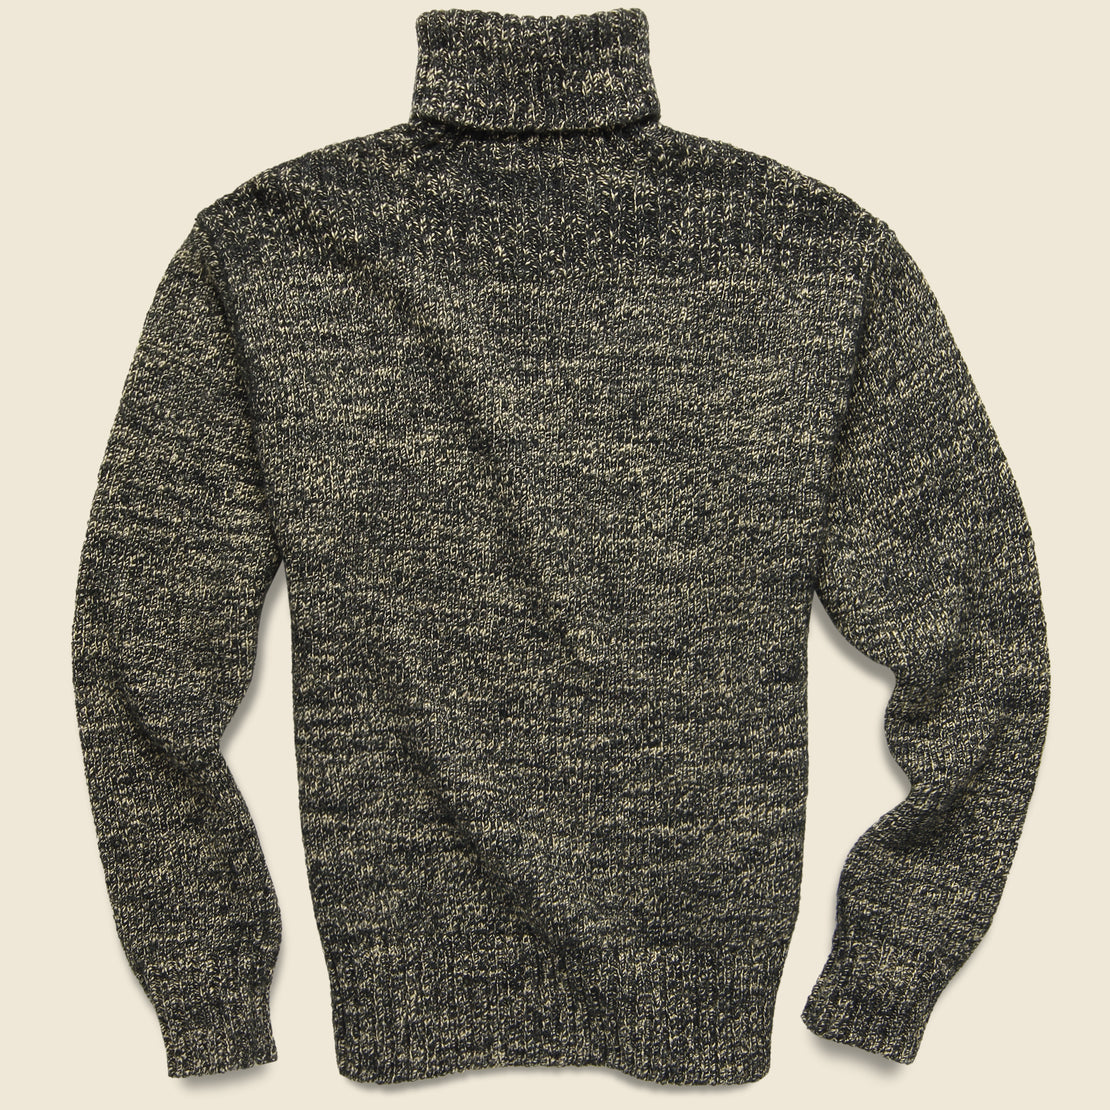 Marled Cotton-Blend Turtleneck Sweater - Black/Cream - RRL - STAG Provisions - Tops - Sweater